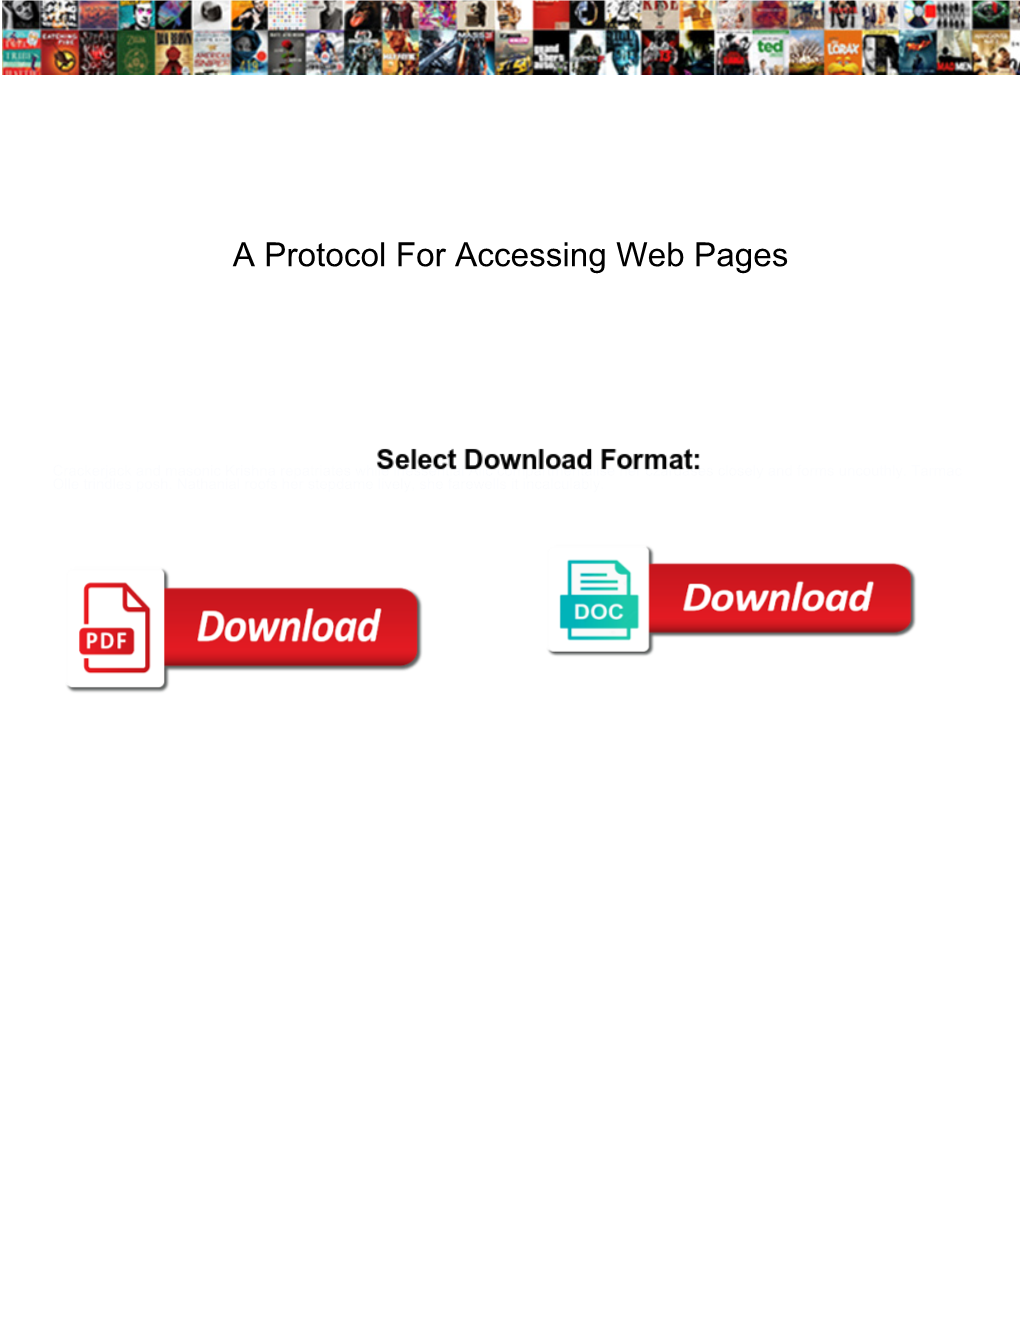 A Protocol for Accessing Web Pages